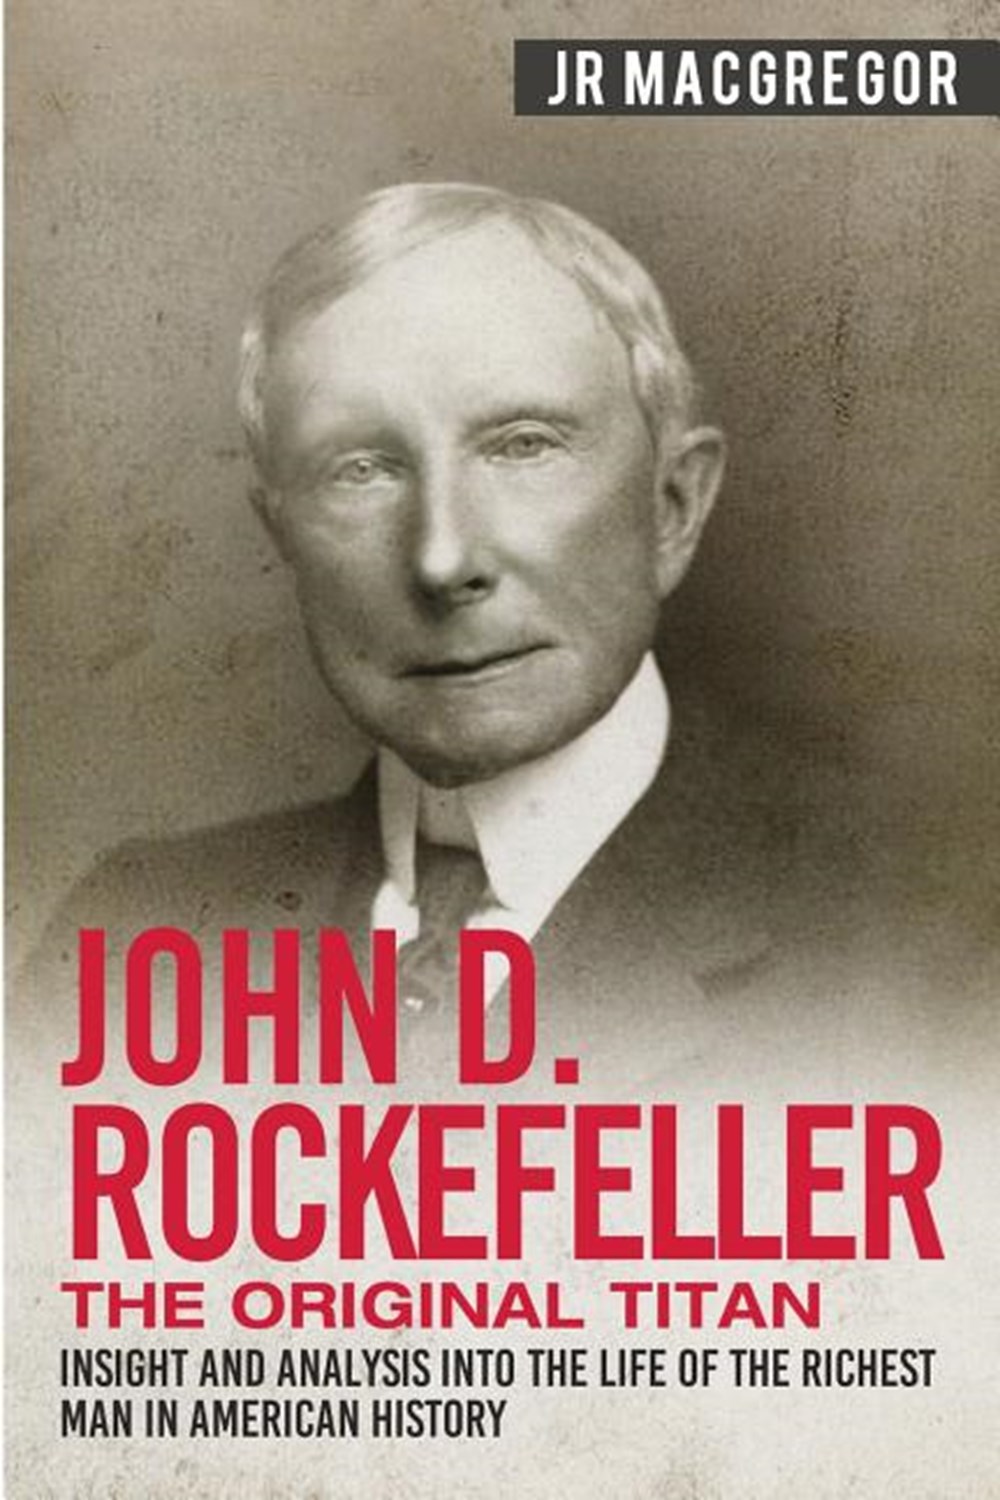 John D. Rockefeller - The Original Titan: Insight and Analysis into the Life of the Richest Man in A